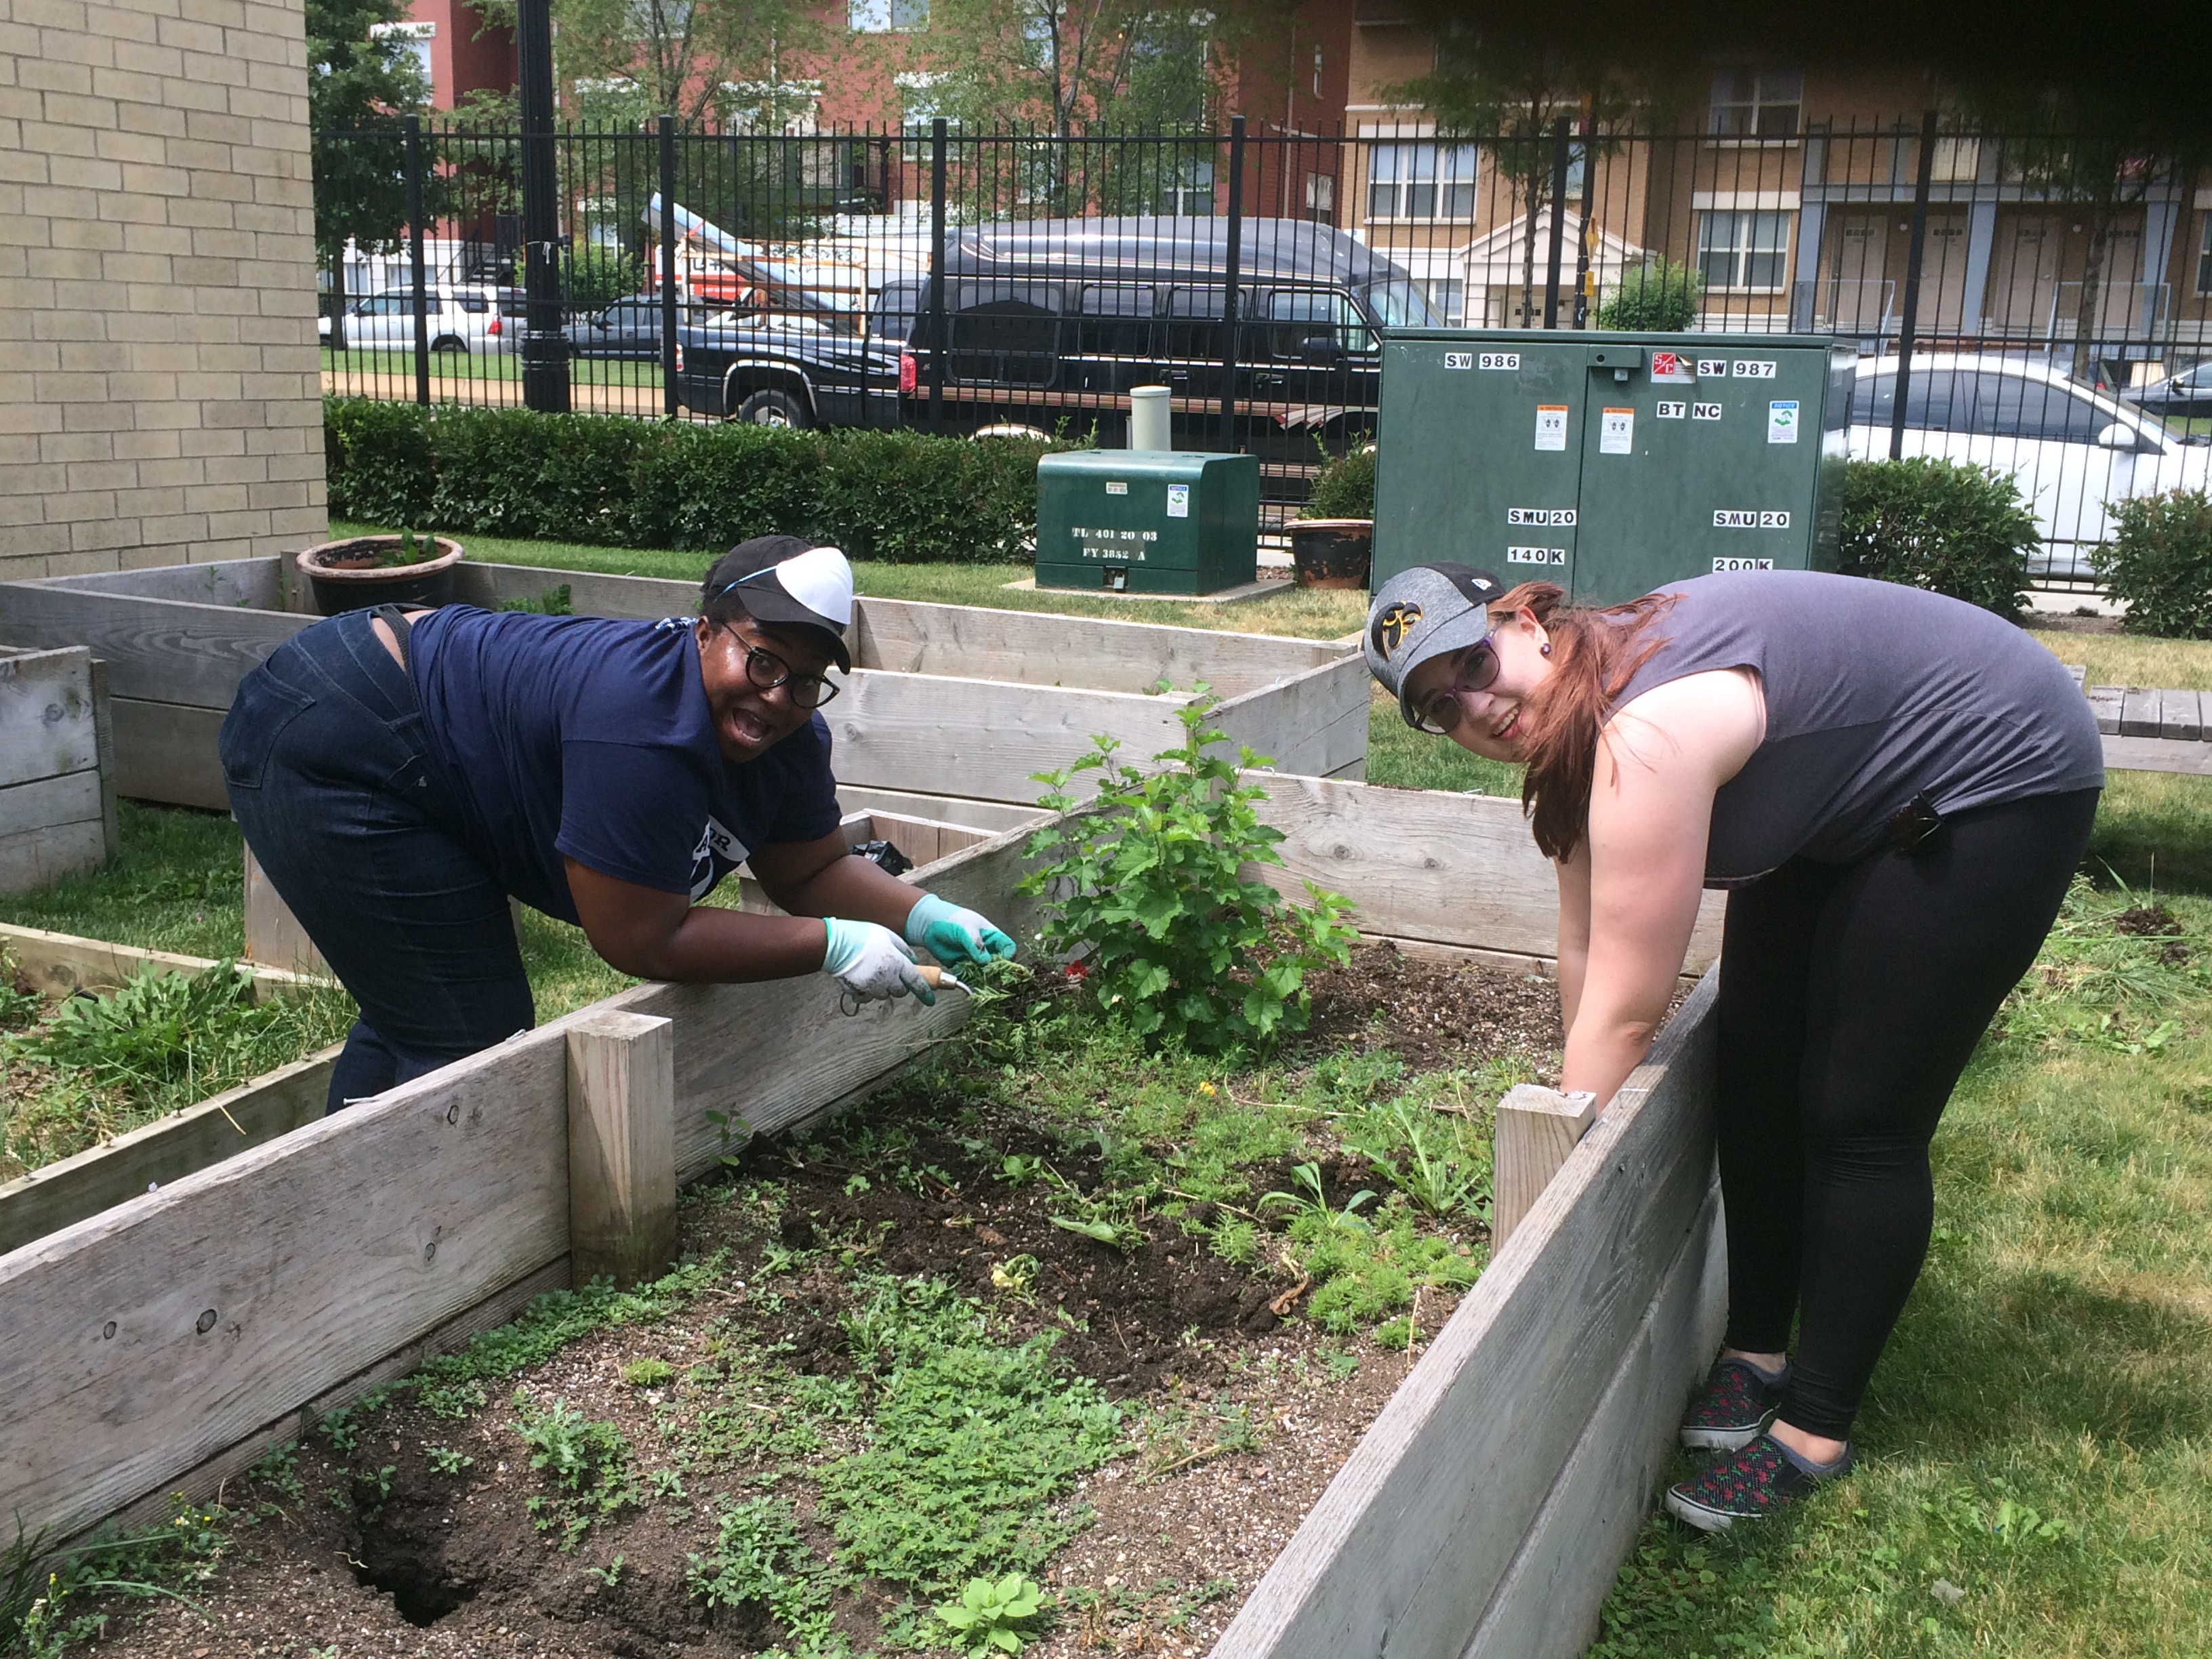  - Our 2016 &amp; 2017 AmeriCorps VISTAs helping with gardening at our partner site, Community Builders - Oakley Square Apartments in July 2017.